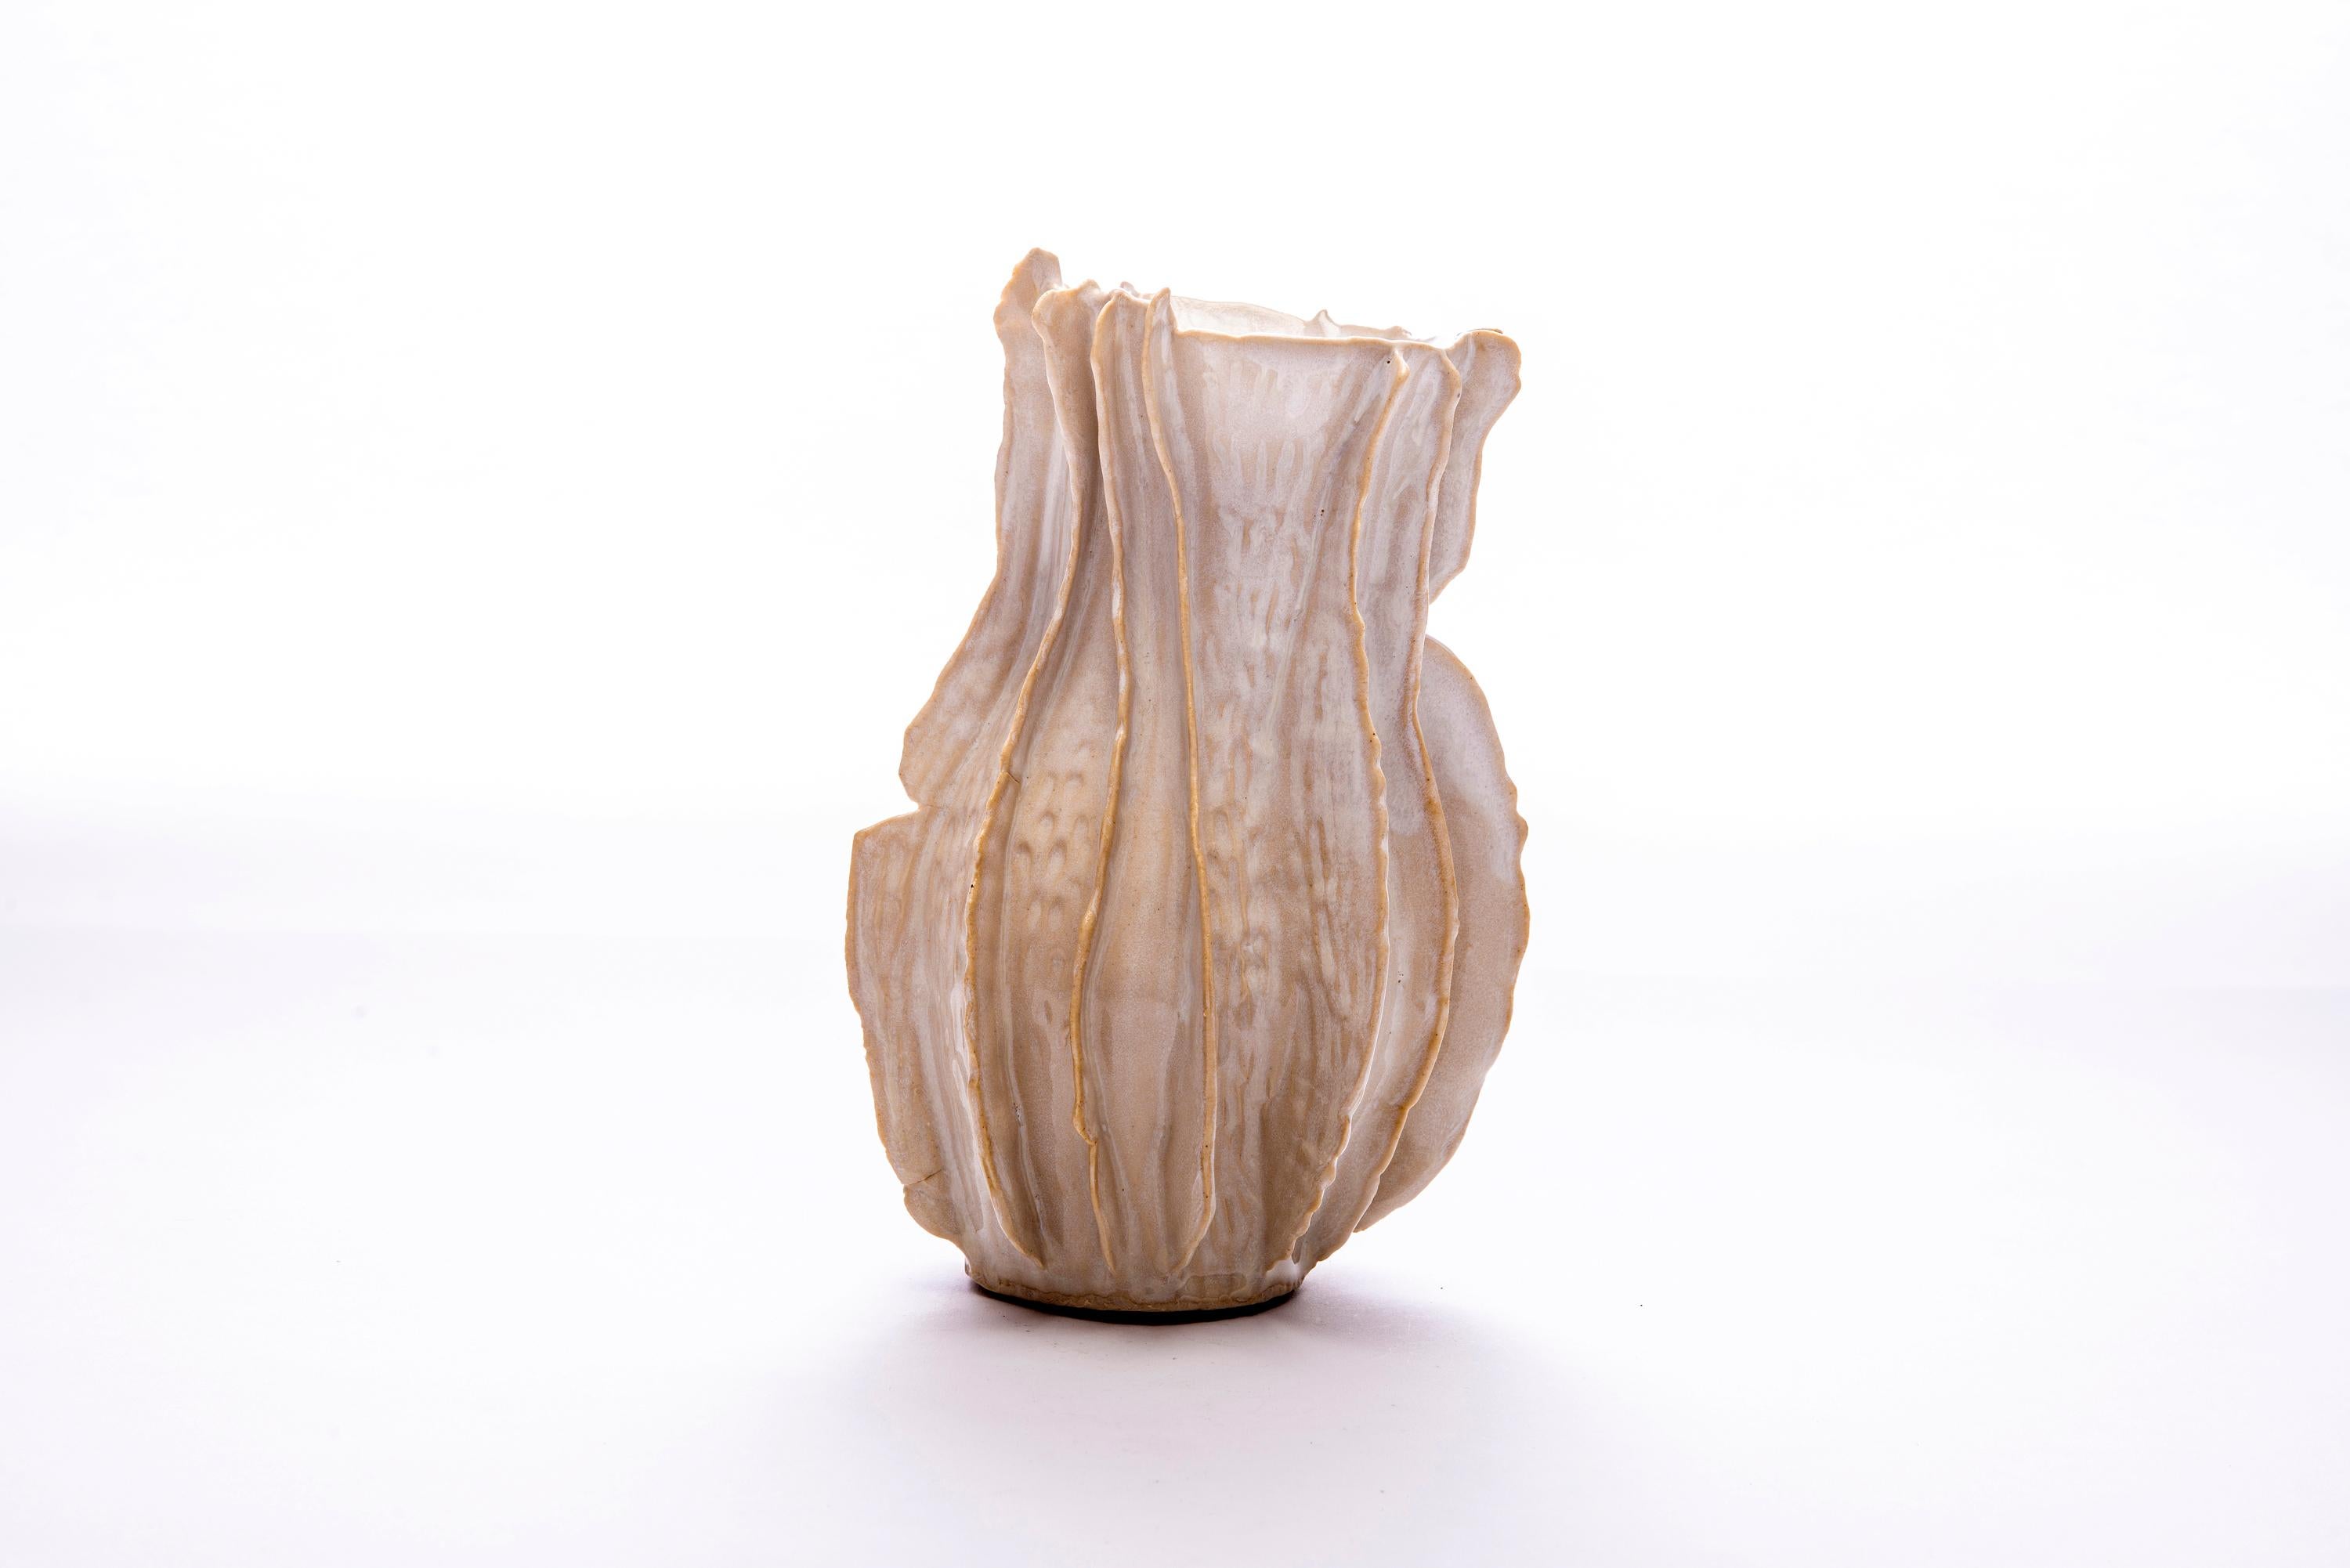 Trish DeMasi
Lamella Vessel, 2020
Glazed Ceramic
10 x 6 x 6.5 in

Trish DeMasi's Lamella Collection of glazed ceramic vessels features natural textures and biomorphic shapes in subtle and pleasing earth tones.